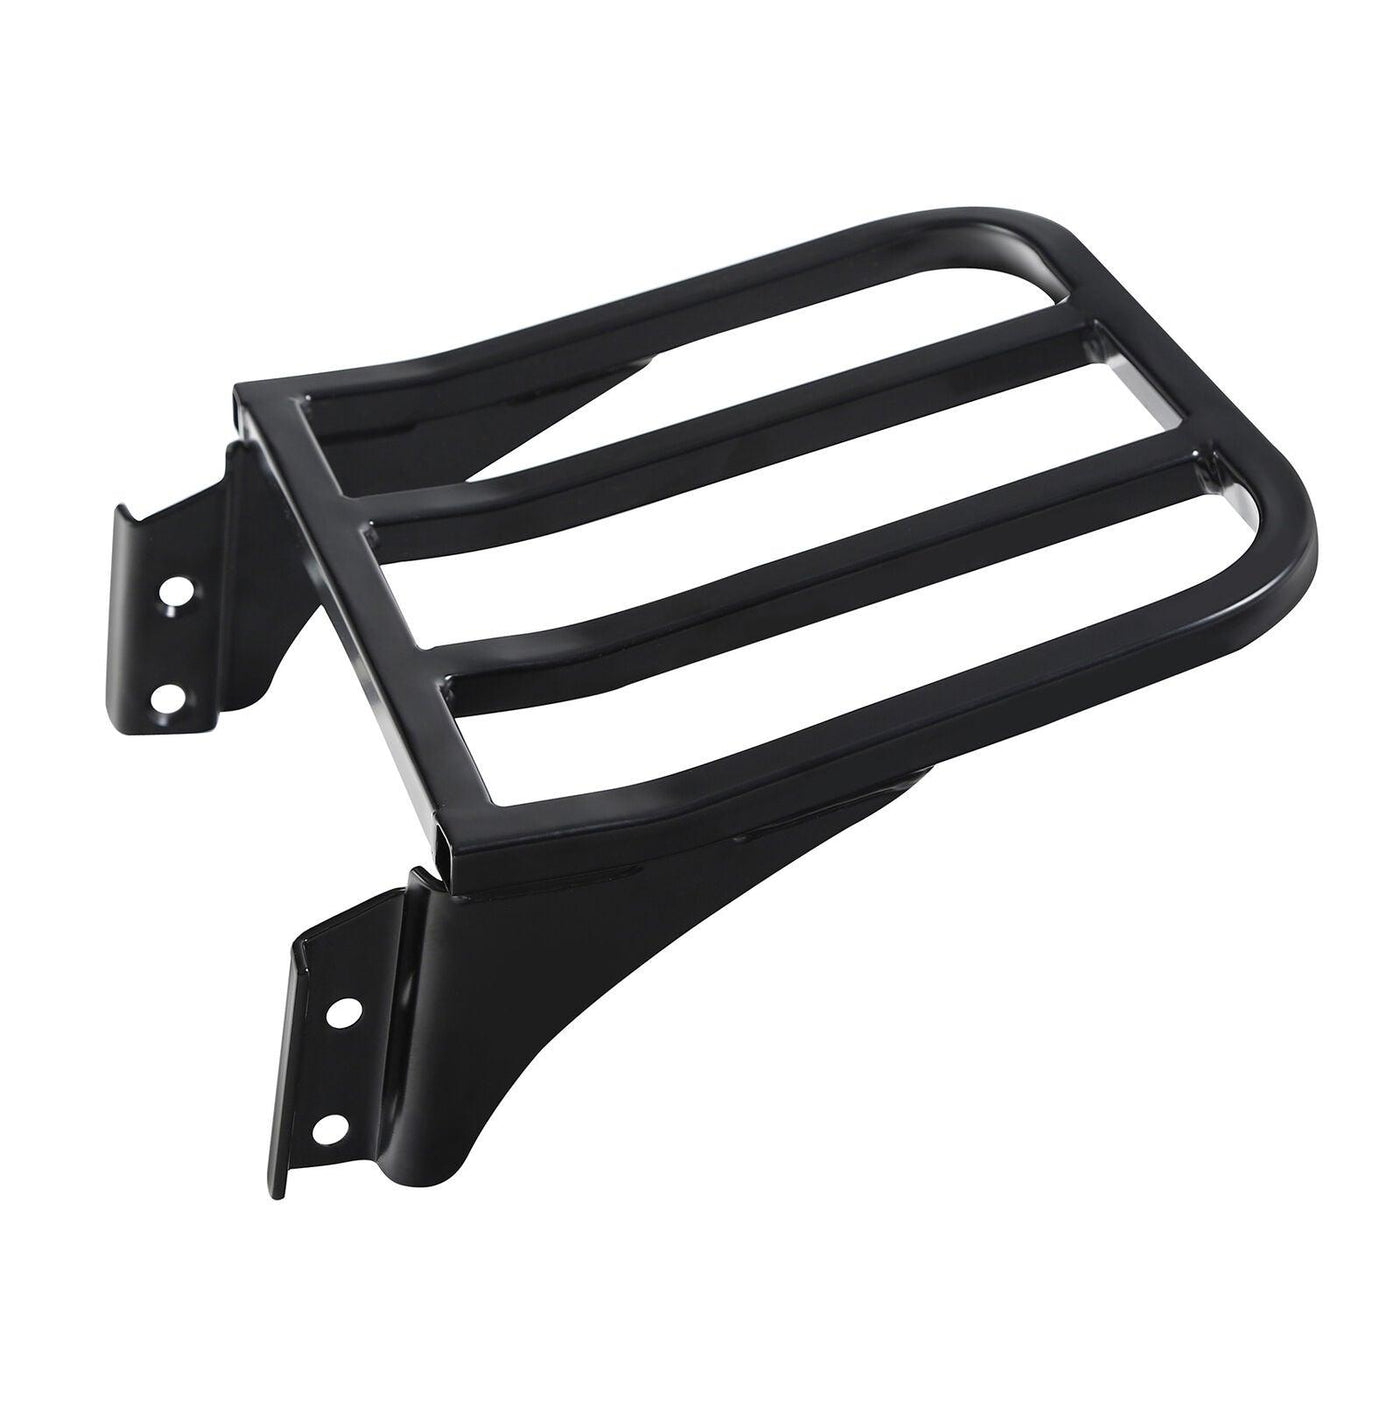 Detachable Rear Backrest Luggage Rack Fit For Harley Dyna FXD FXDB FXDL 2006-UP - Moto Life Products